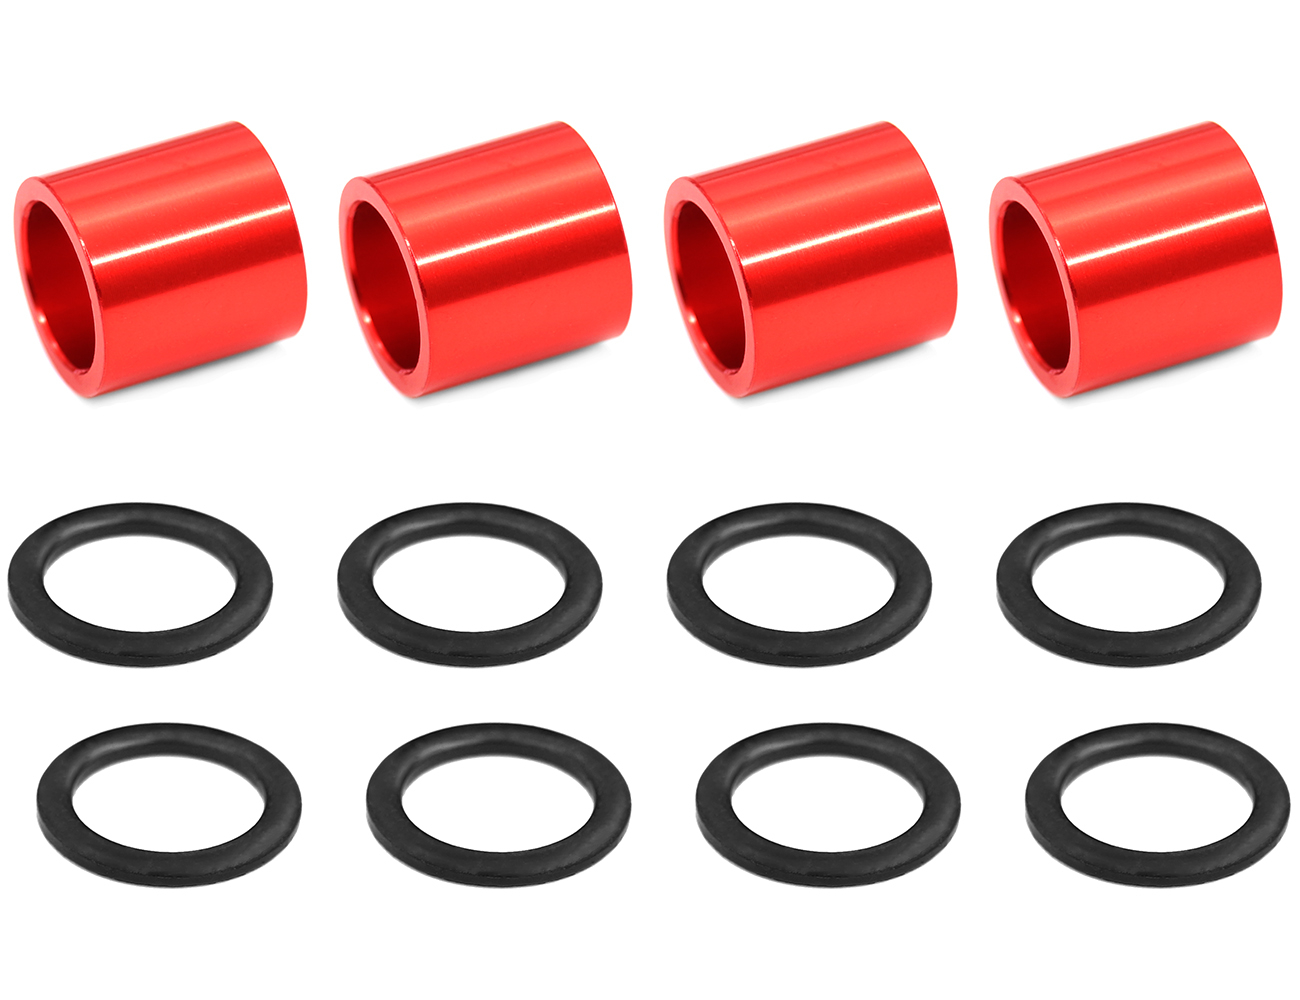 Colored Bearing Spacers and Washers Lightweight Speed Hardware Kit for Skateboards and Longboards 4 Spacers + 8 Washers